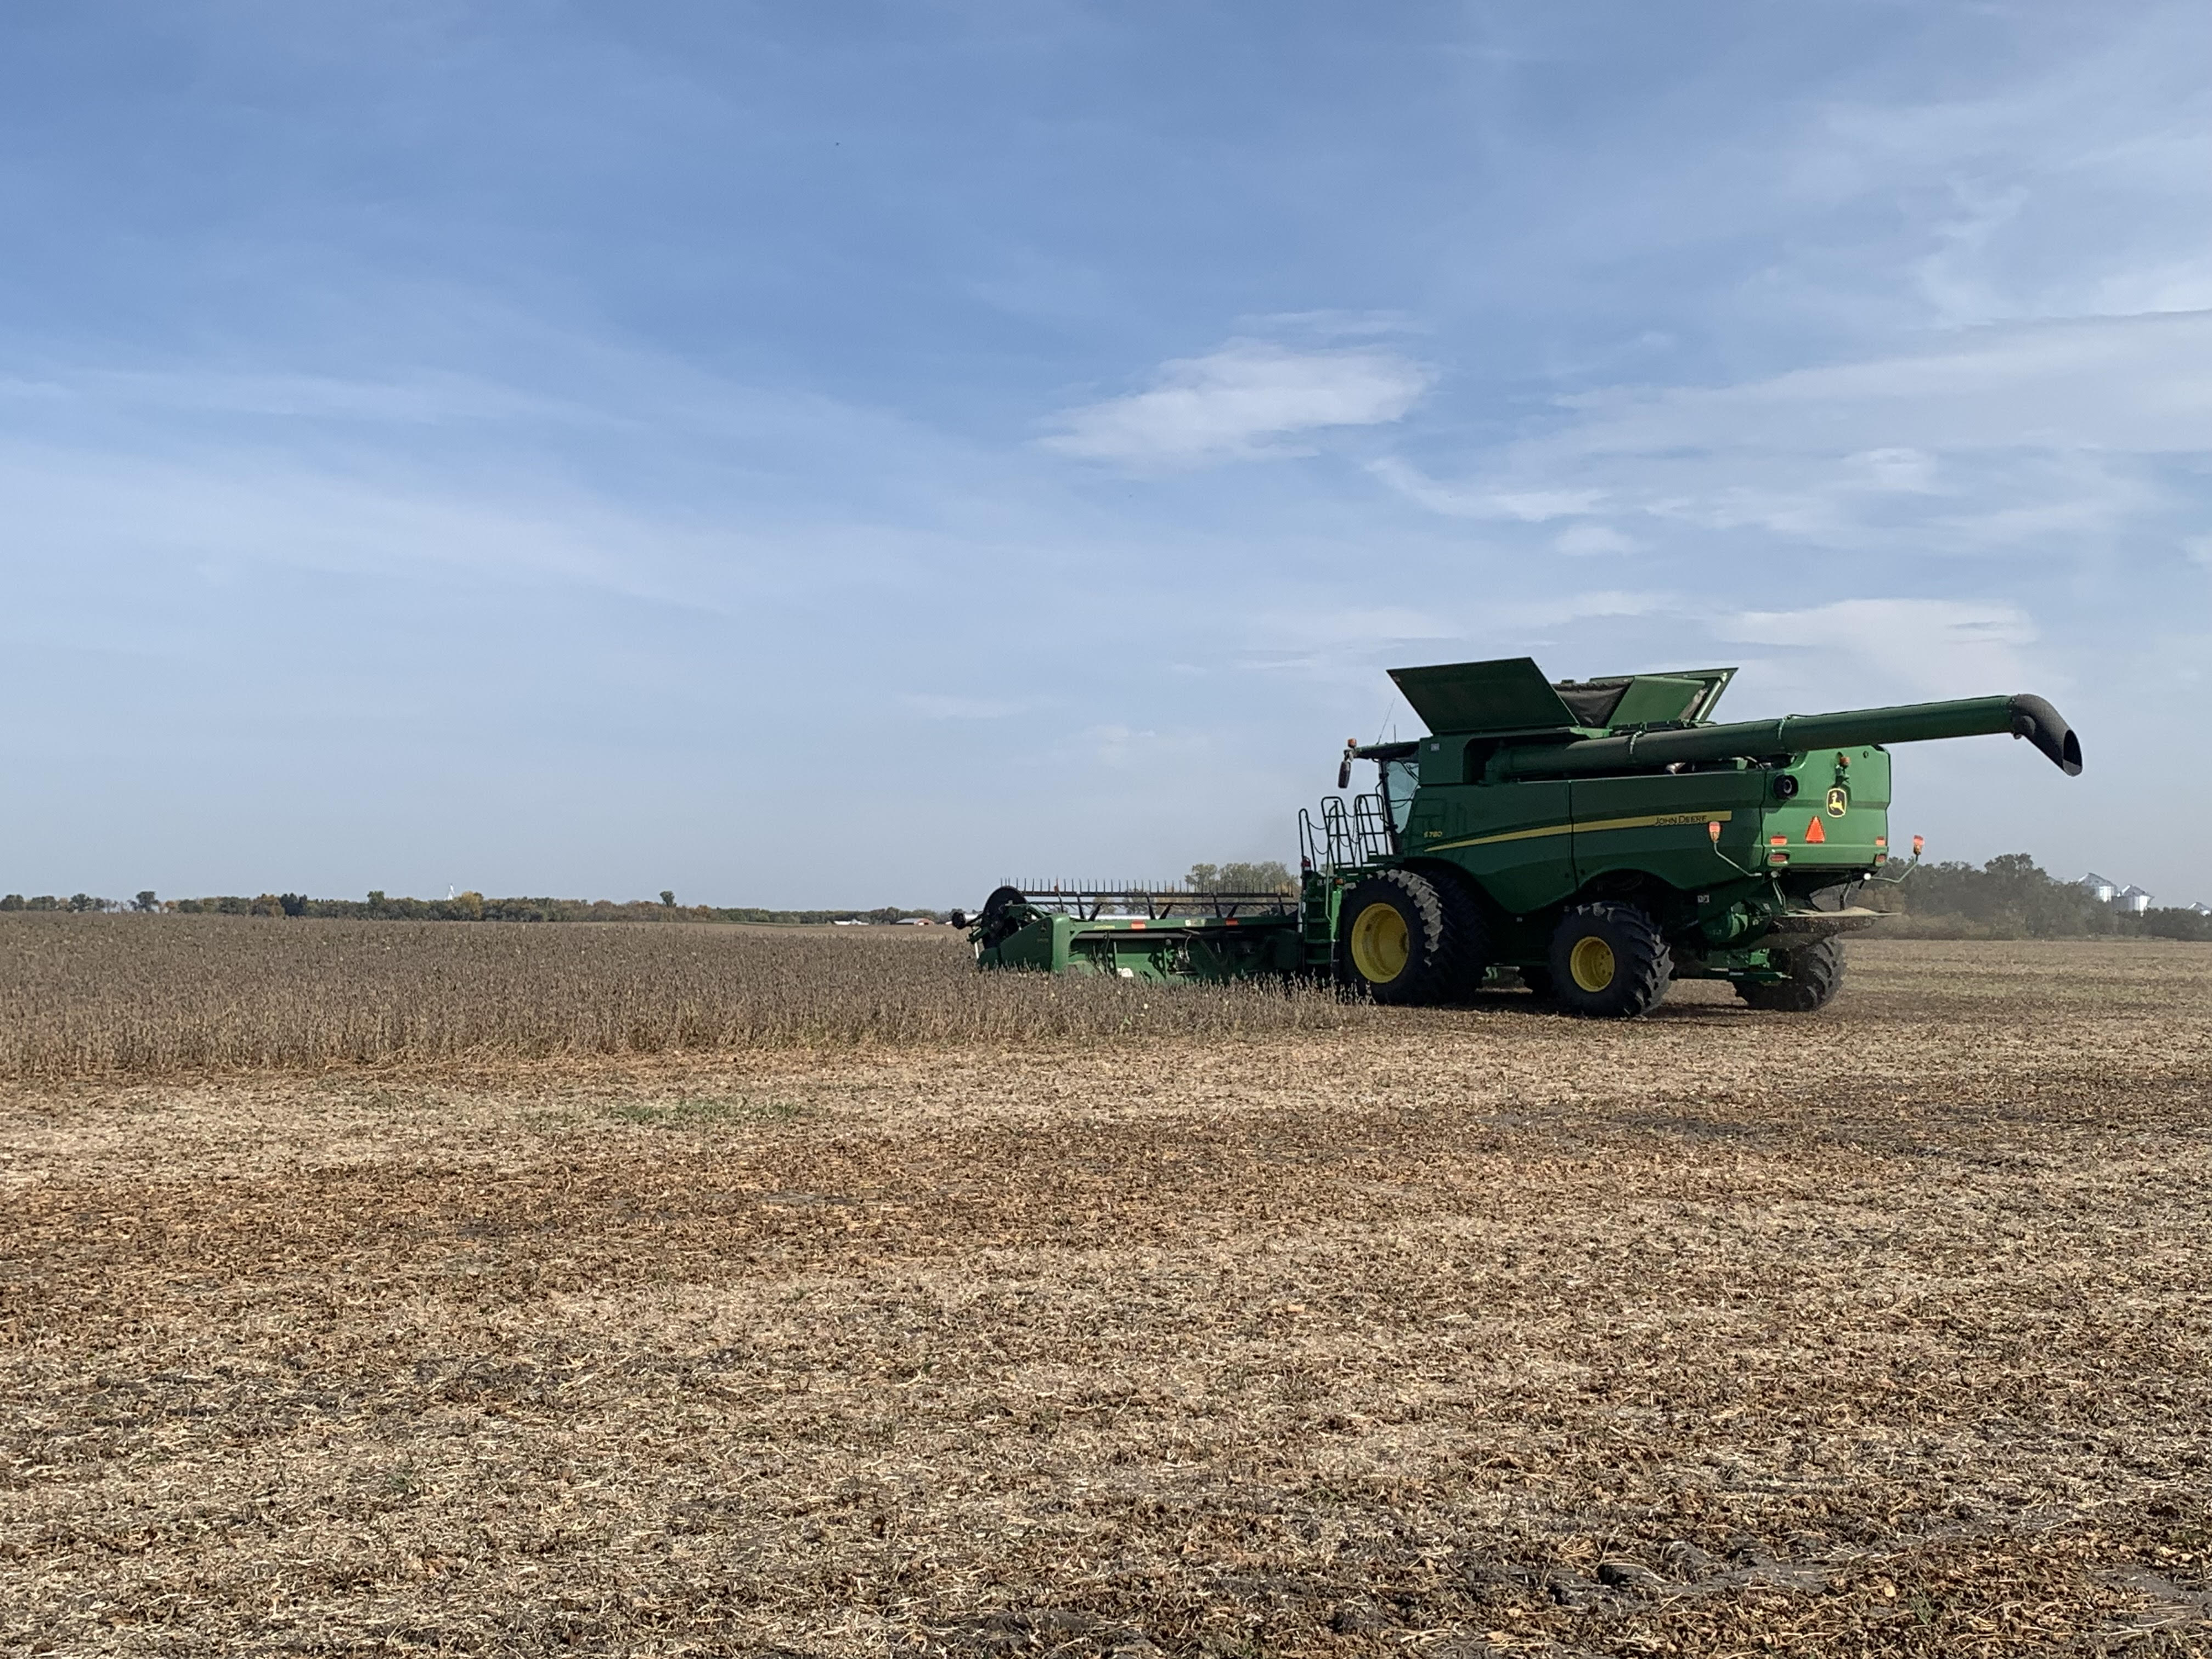 Mid-morning Ag News, October 4, 2021: Farmers working on corn and soybean harvests in central North Dakota